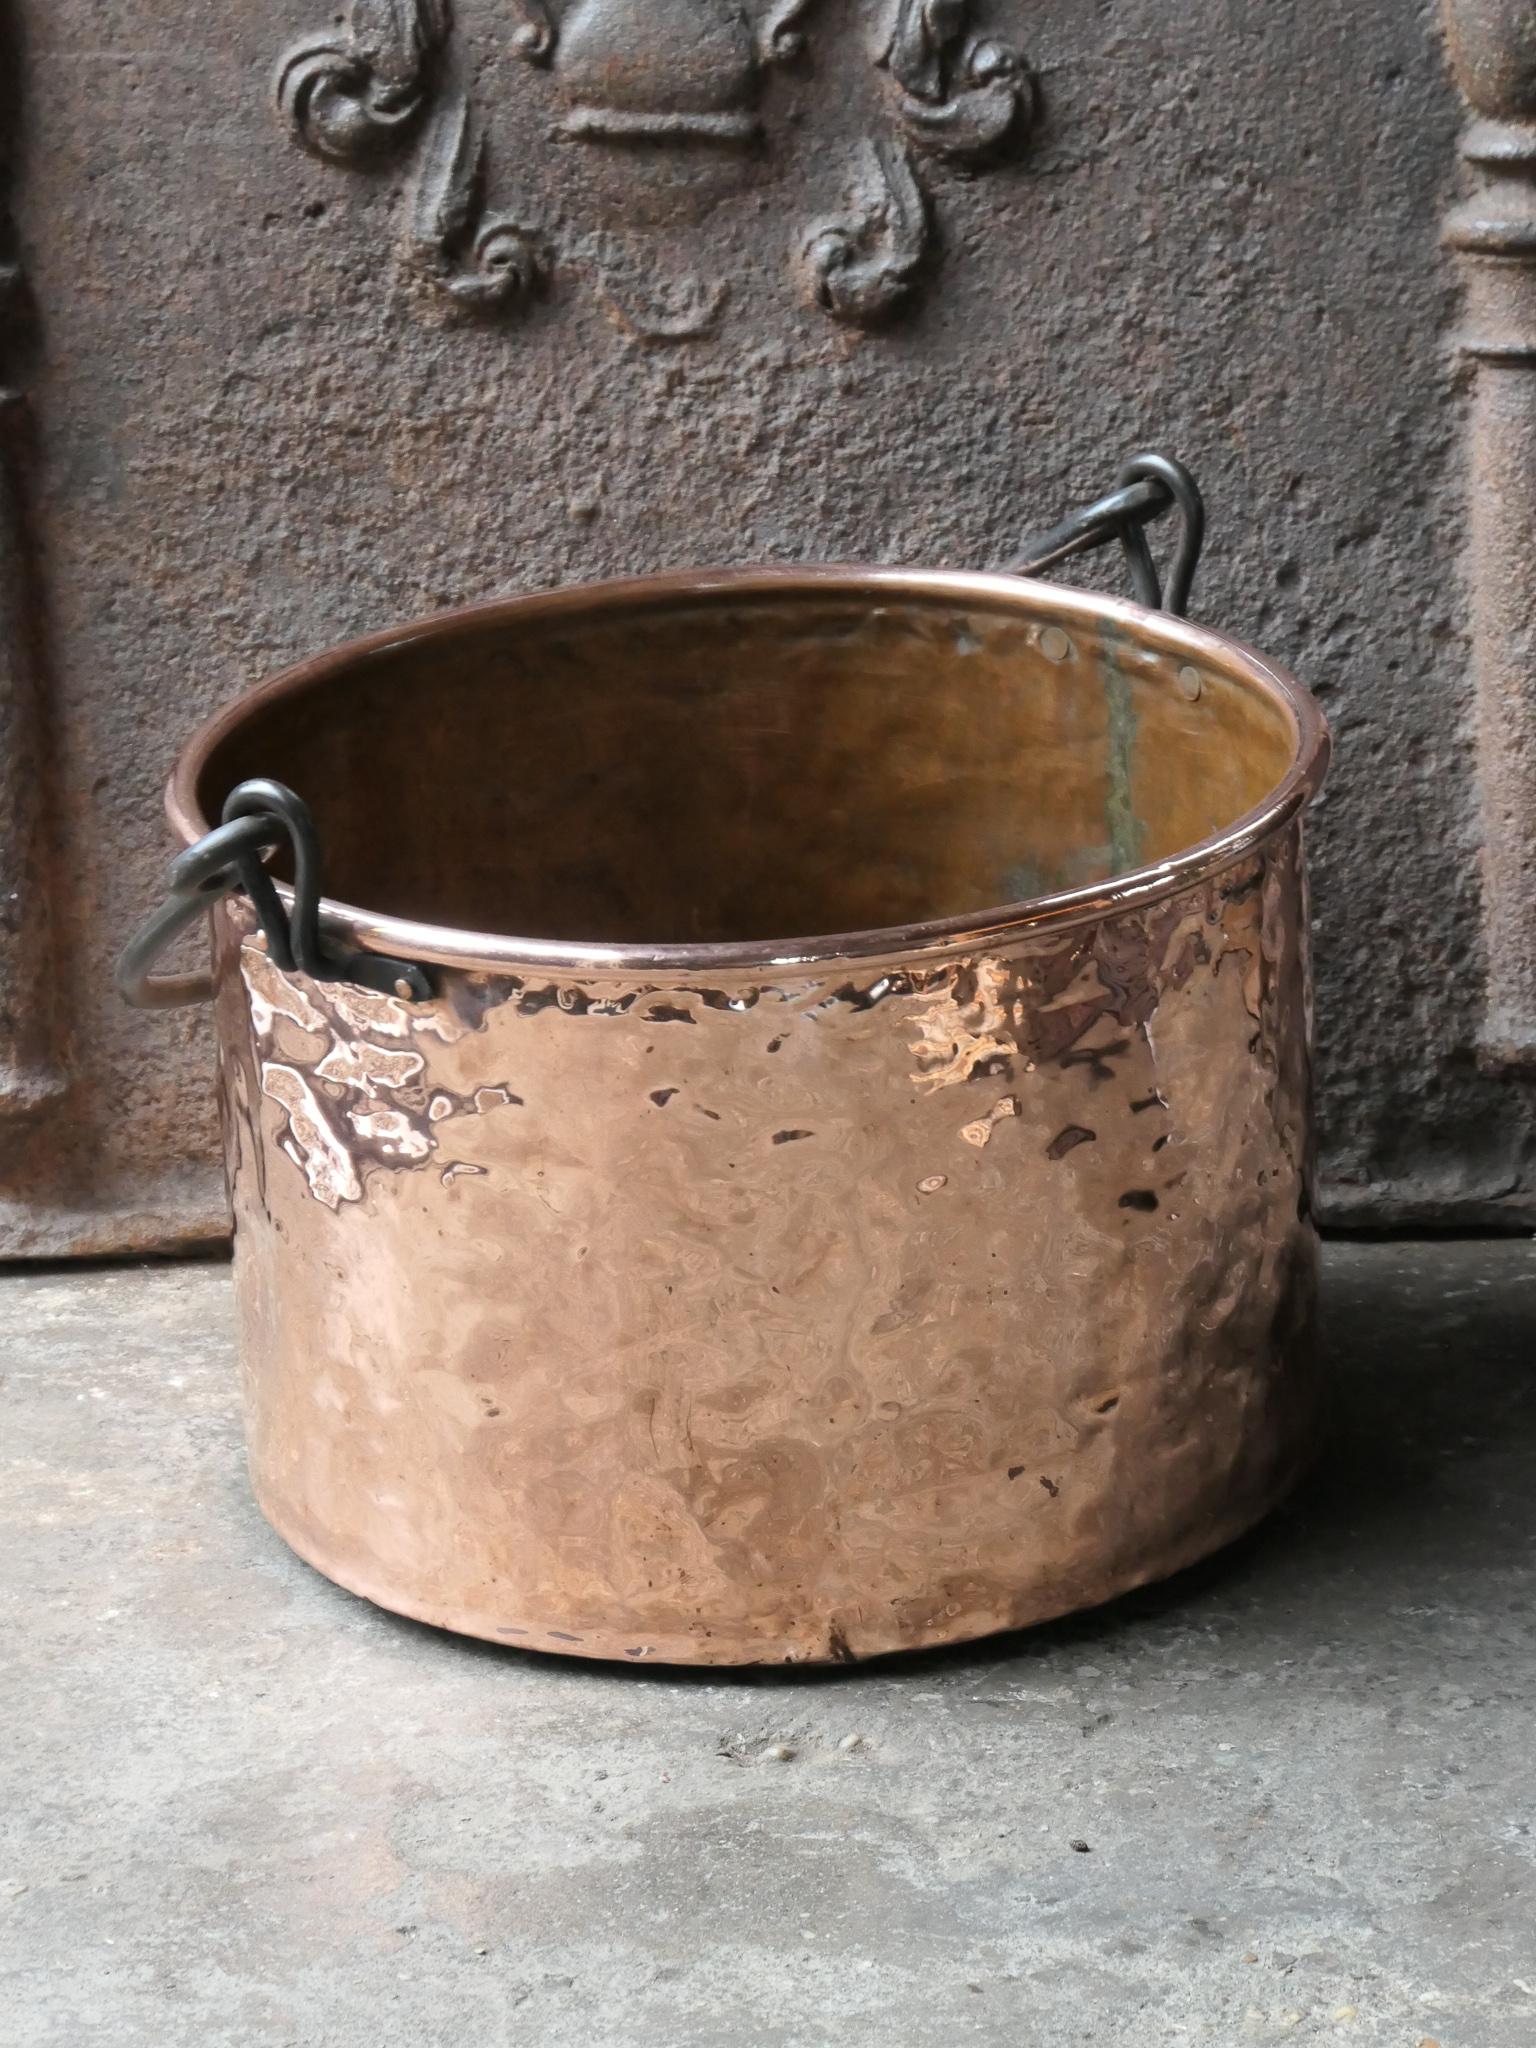 18th - 19th Century Dutch neoclassical log basket. The firewood basket is made of polished copper and has a wrought iron handle. Also called 'aker'. Used to draw water from the well and cook over an open fire.

The log holder is in a good